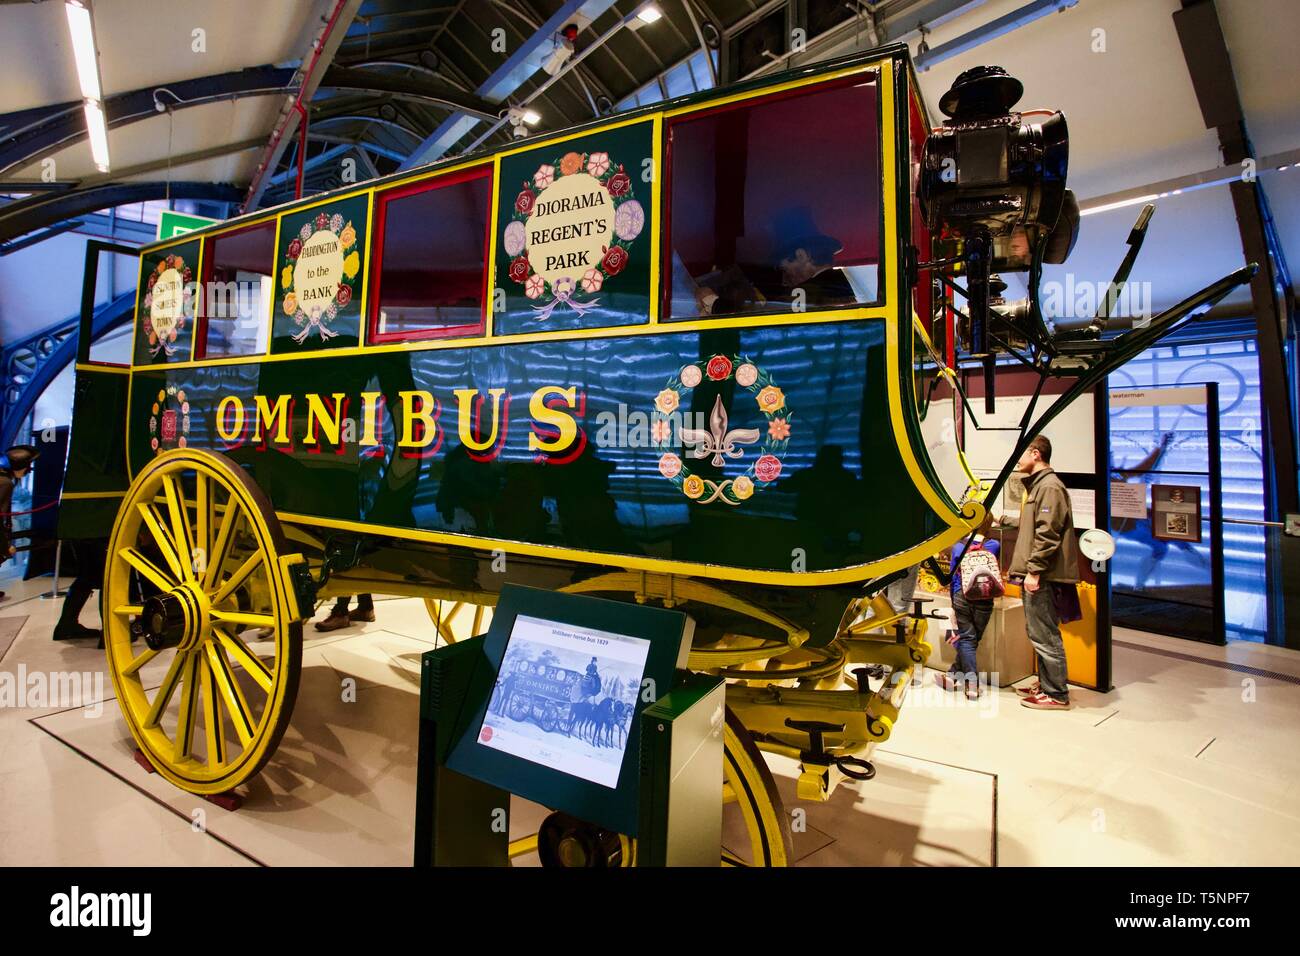 1929 reconstruction of the Shillibeer horse bus from 1829, London Transport Museum, London,  England. Stock Photo